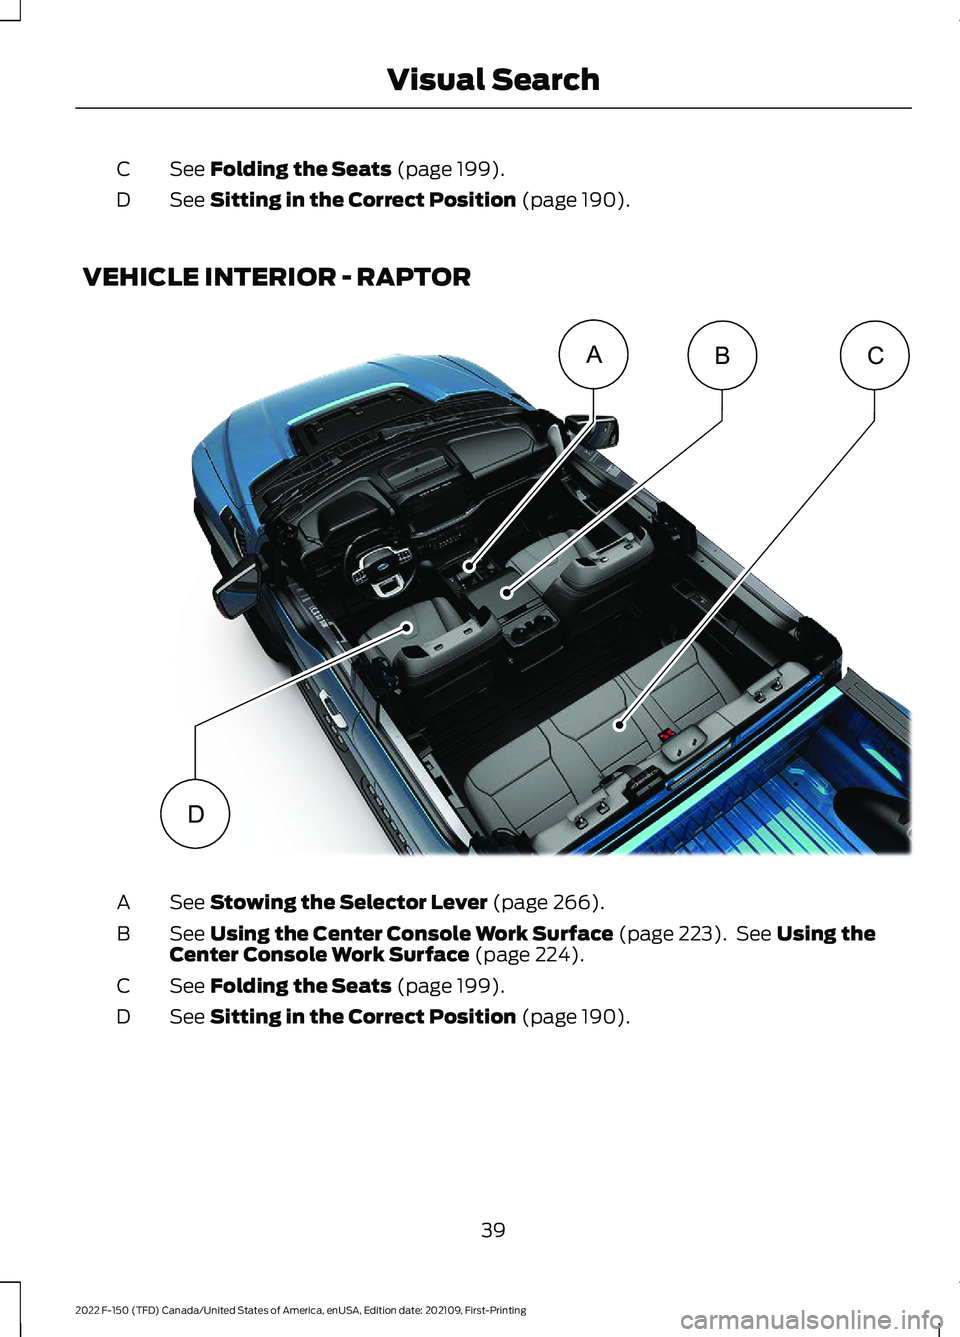 FORD F-150 2022 Service Manual See Folding the Seats (page 199).
C
See 
Sitting in the Correct Position (page 190).
D
VEHICLE INTERIOR - RAPTOR See 
Stowing the Selector Lever (page 266).
A
See 
Using the Center Console Work Surfac